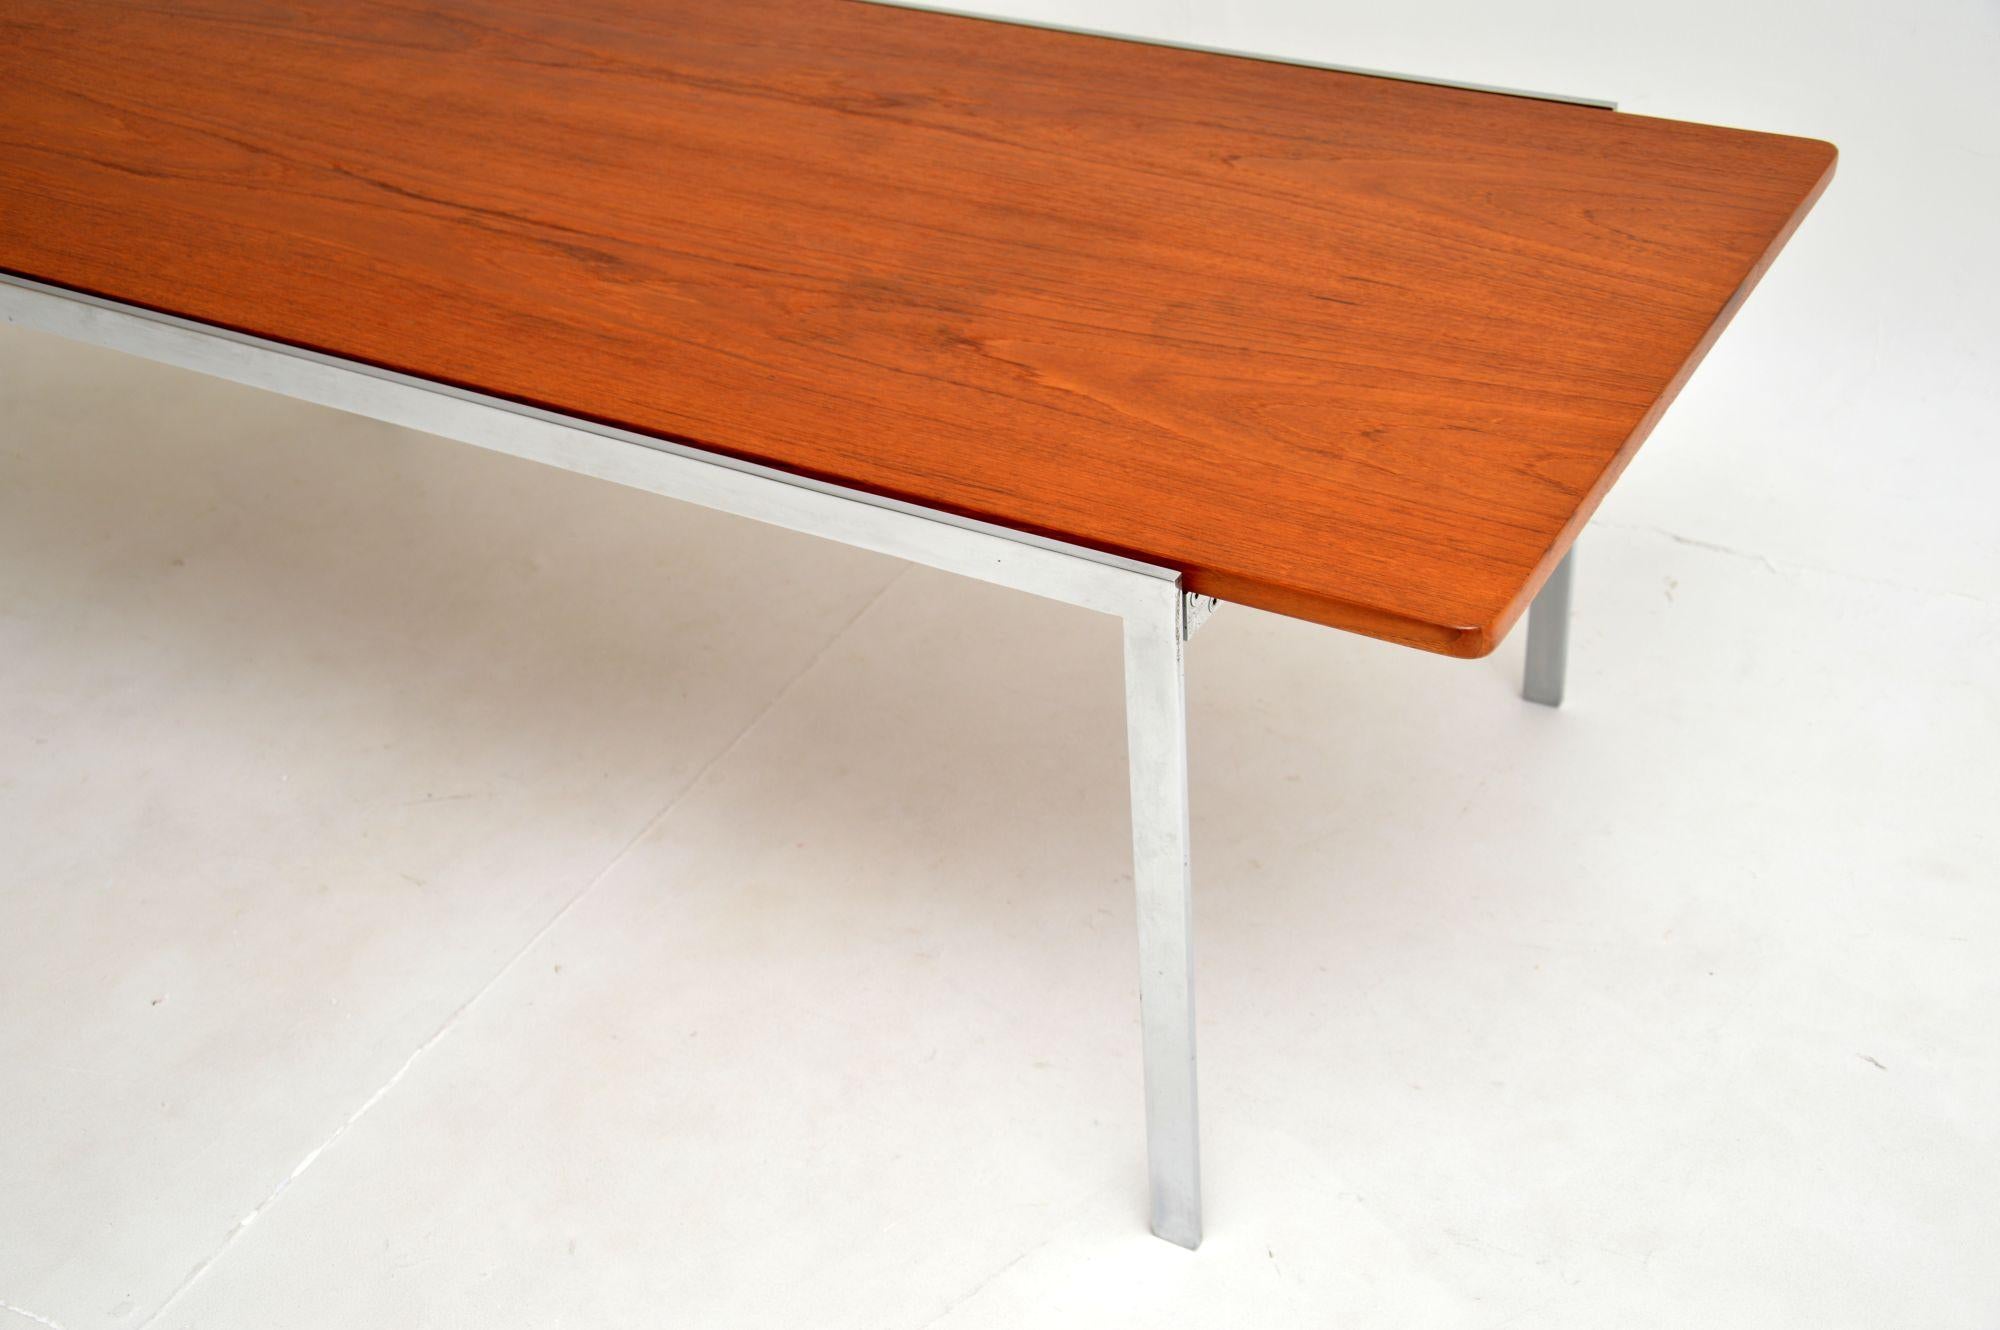 Danish Vintage Teak and Chrome Coffee Table by Arne Jacobsen For Sale 4